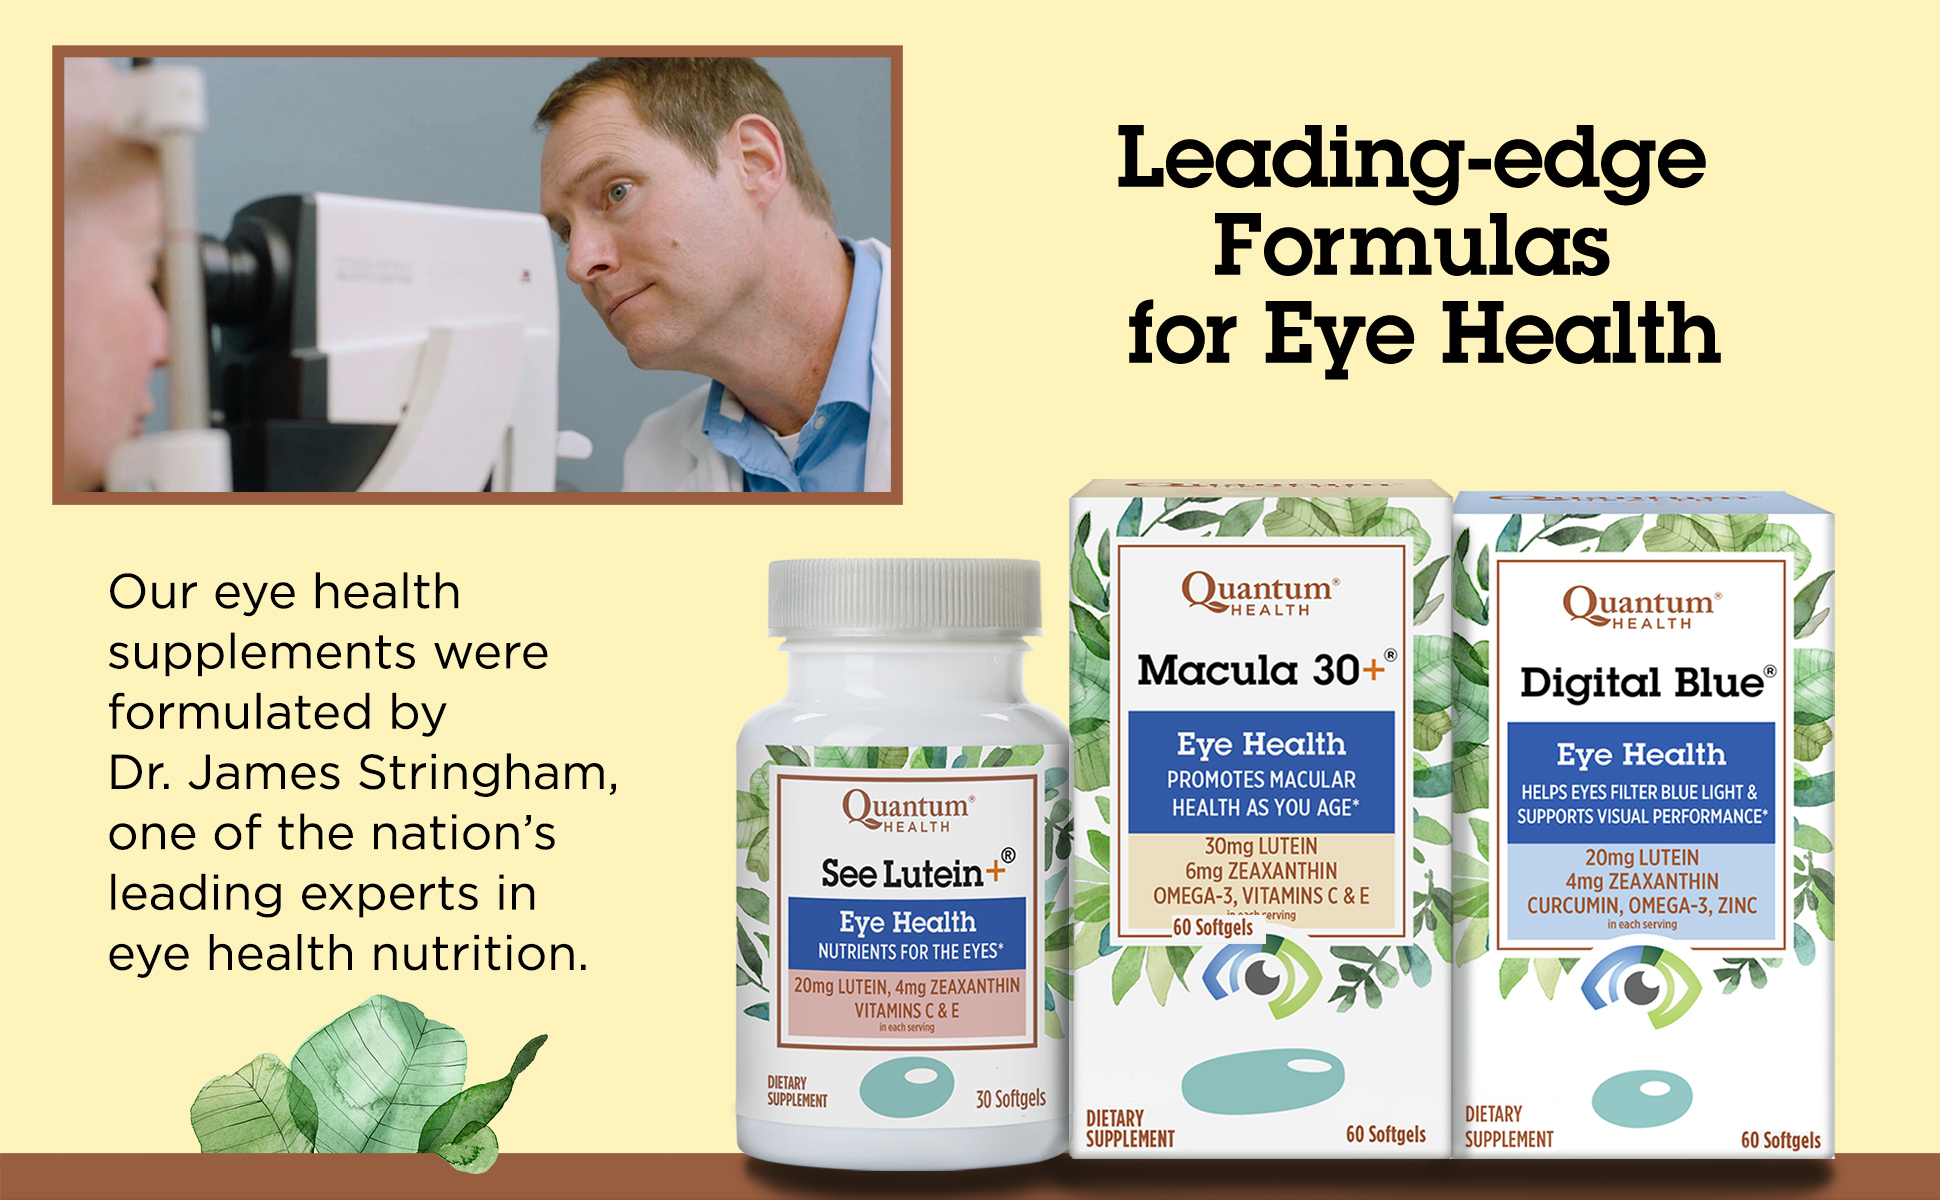 Our eye health supplements were formulated by Dr. James Stringham, one of the nation's leading experts in eye health nutrition